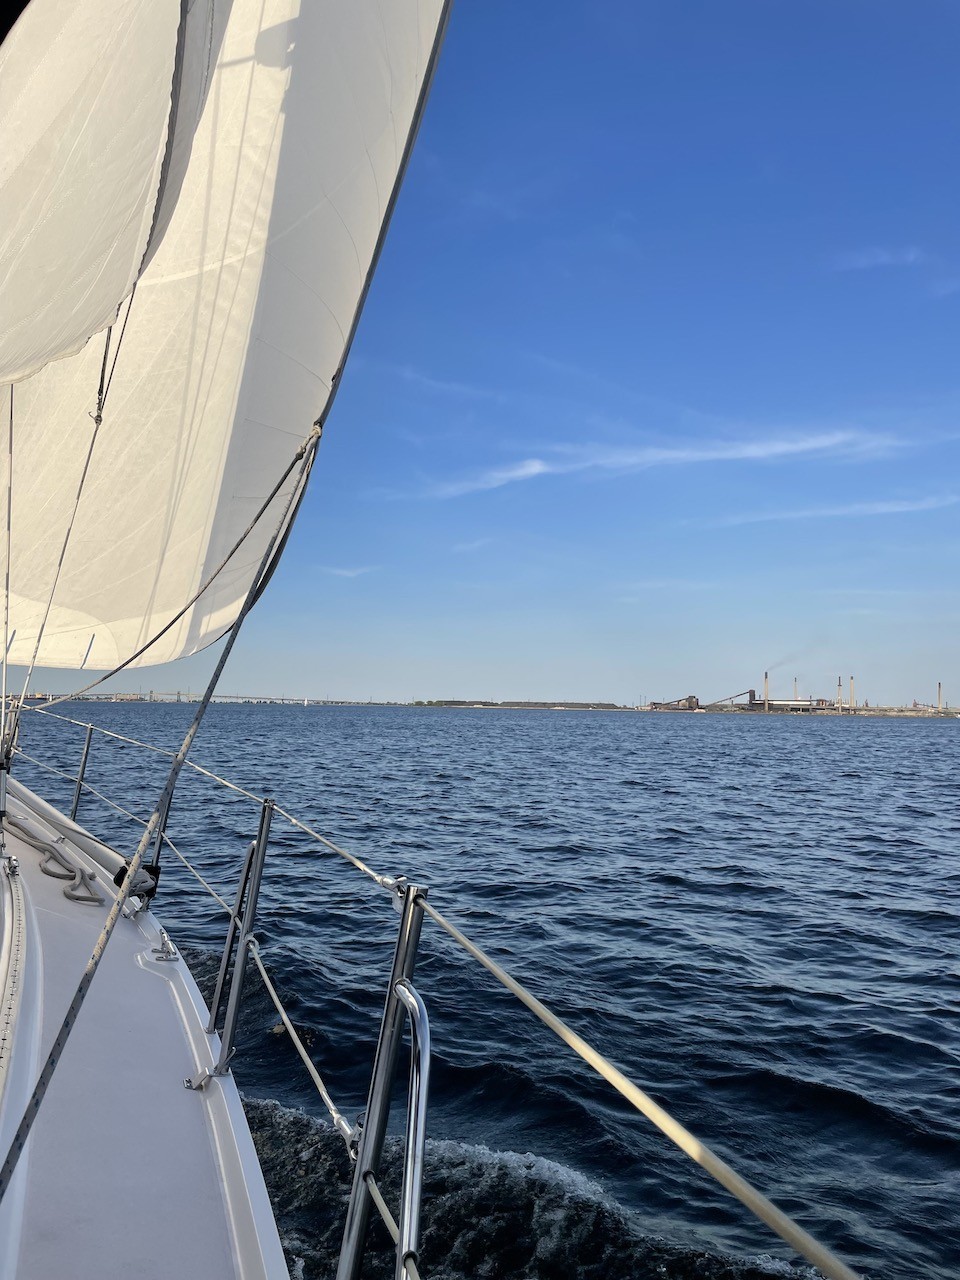 Sailing in the Hamilton Harbour Ontario Canada - A blue sky and just the right amount of wind made for the perfect conditions for an evening sail before the sunset on the Hamilton Harbour in Ontario, Canada.